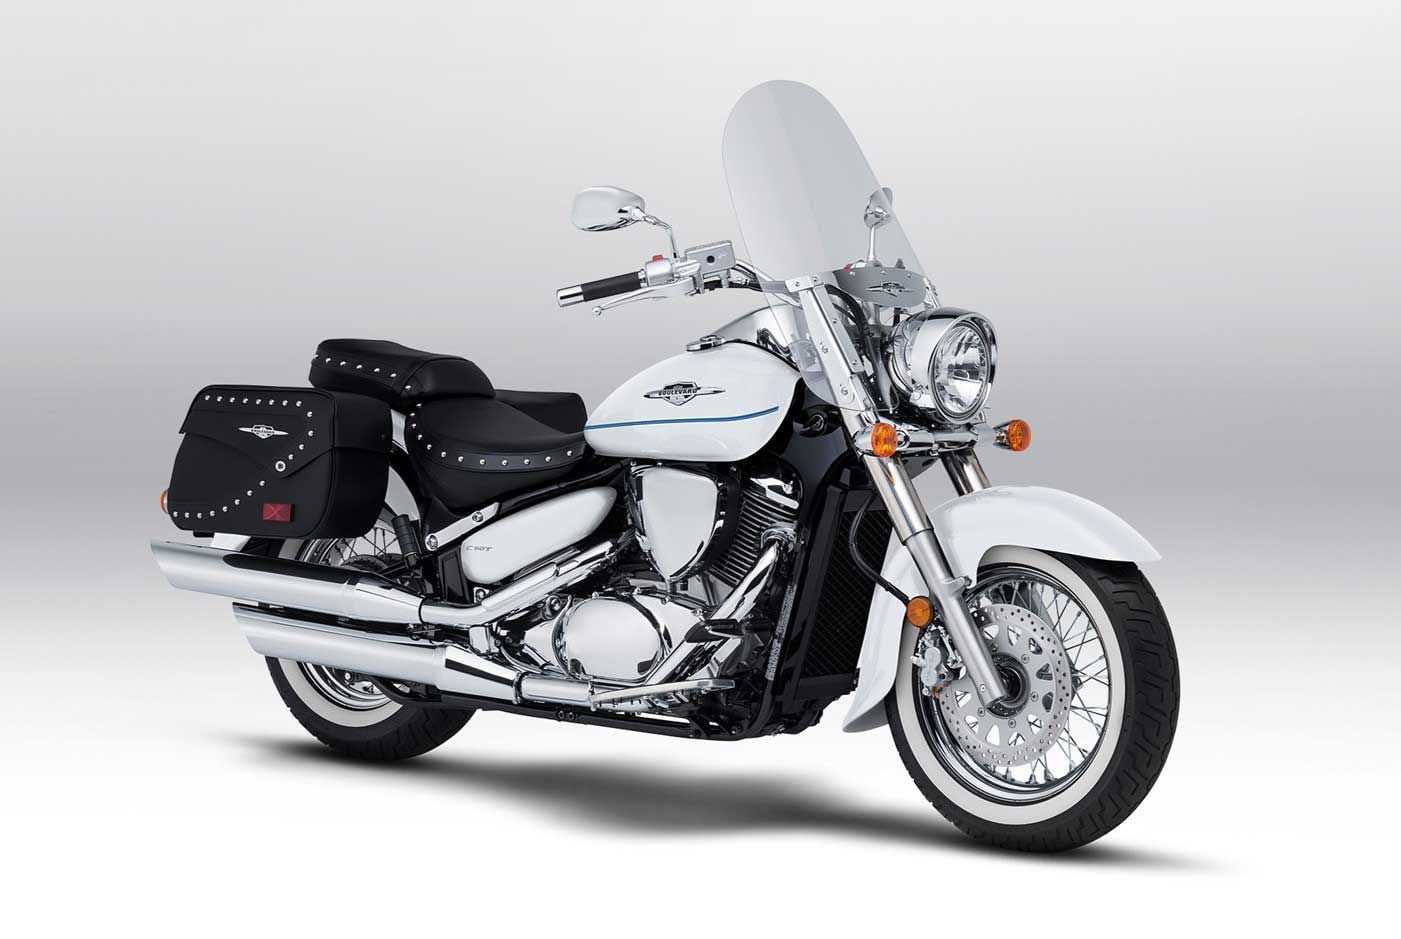 Whitewalls, studs, and all, the touring-friendly C50T is still listed  on Suzuki’s website as a 2023 model.